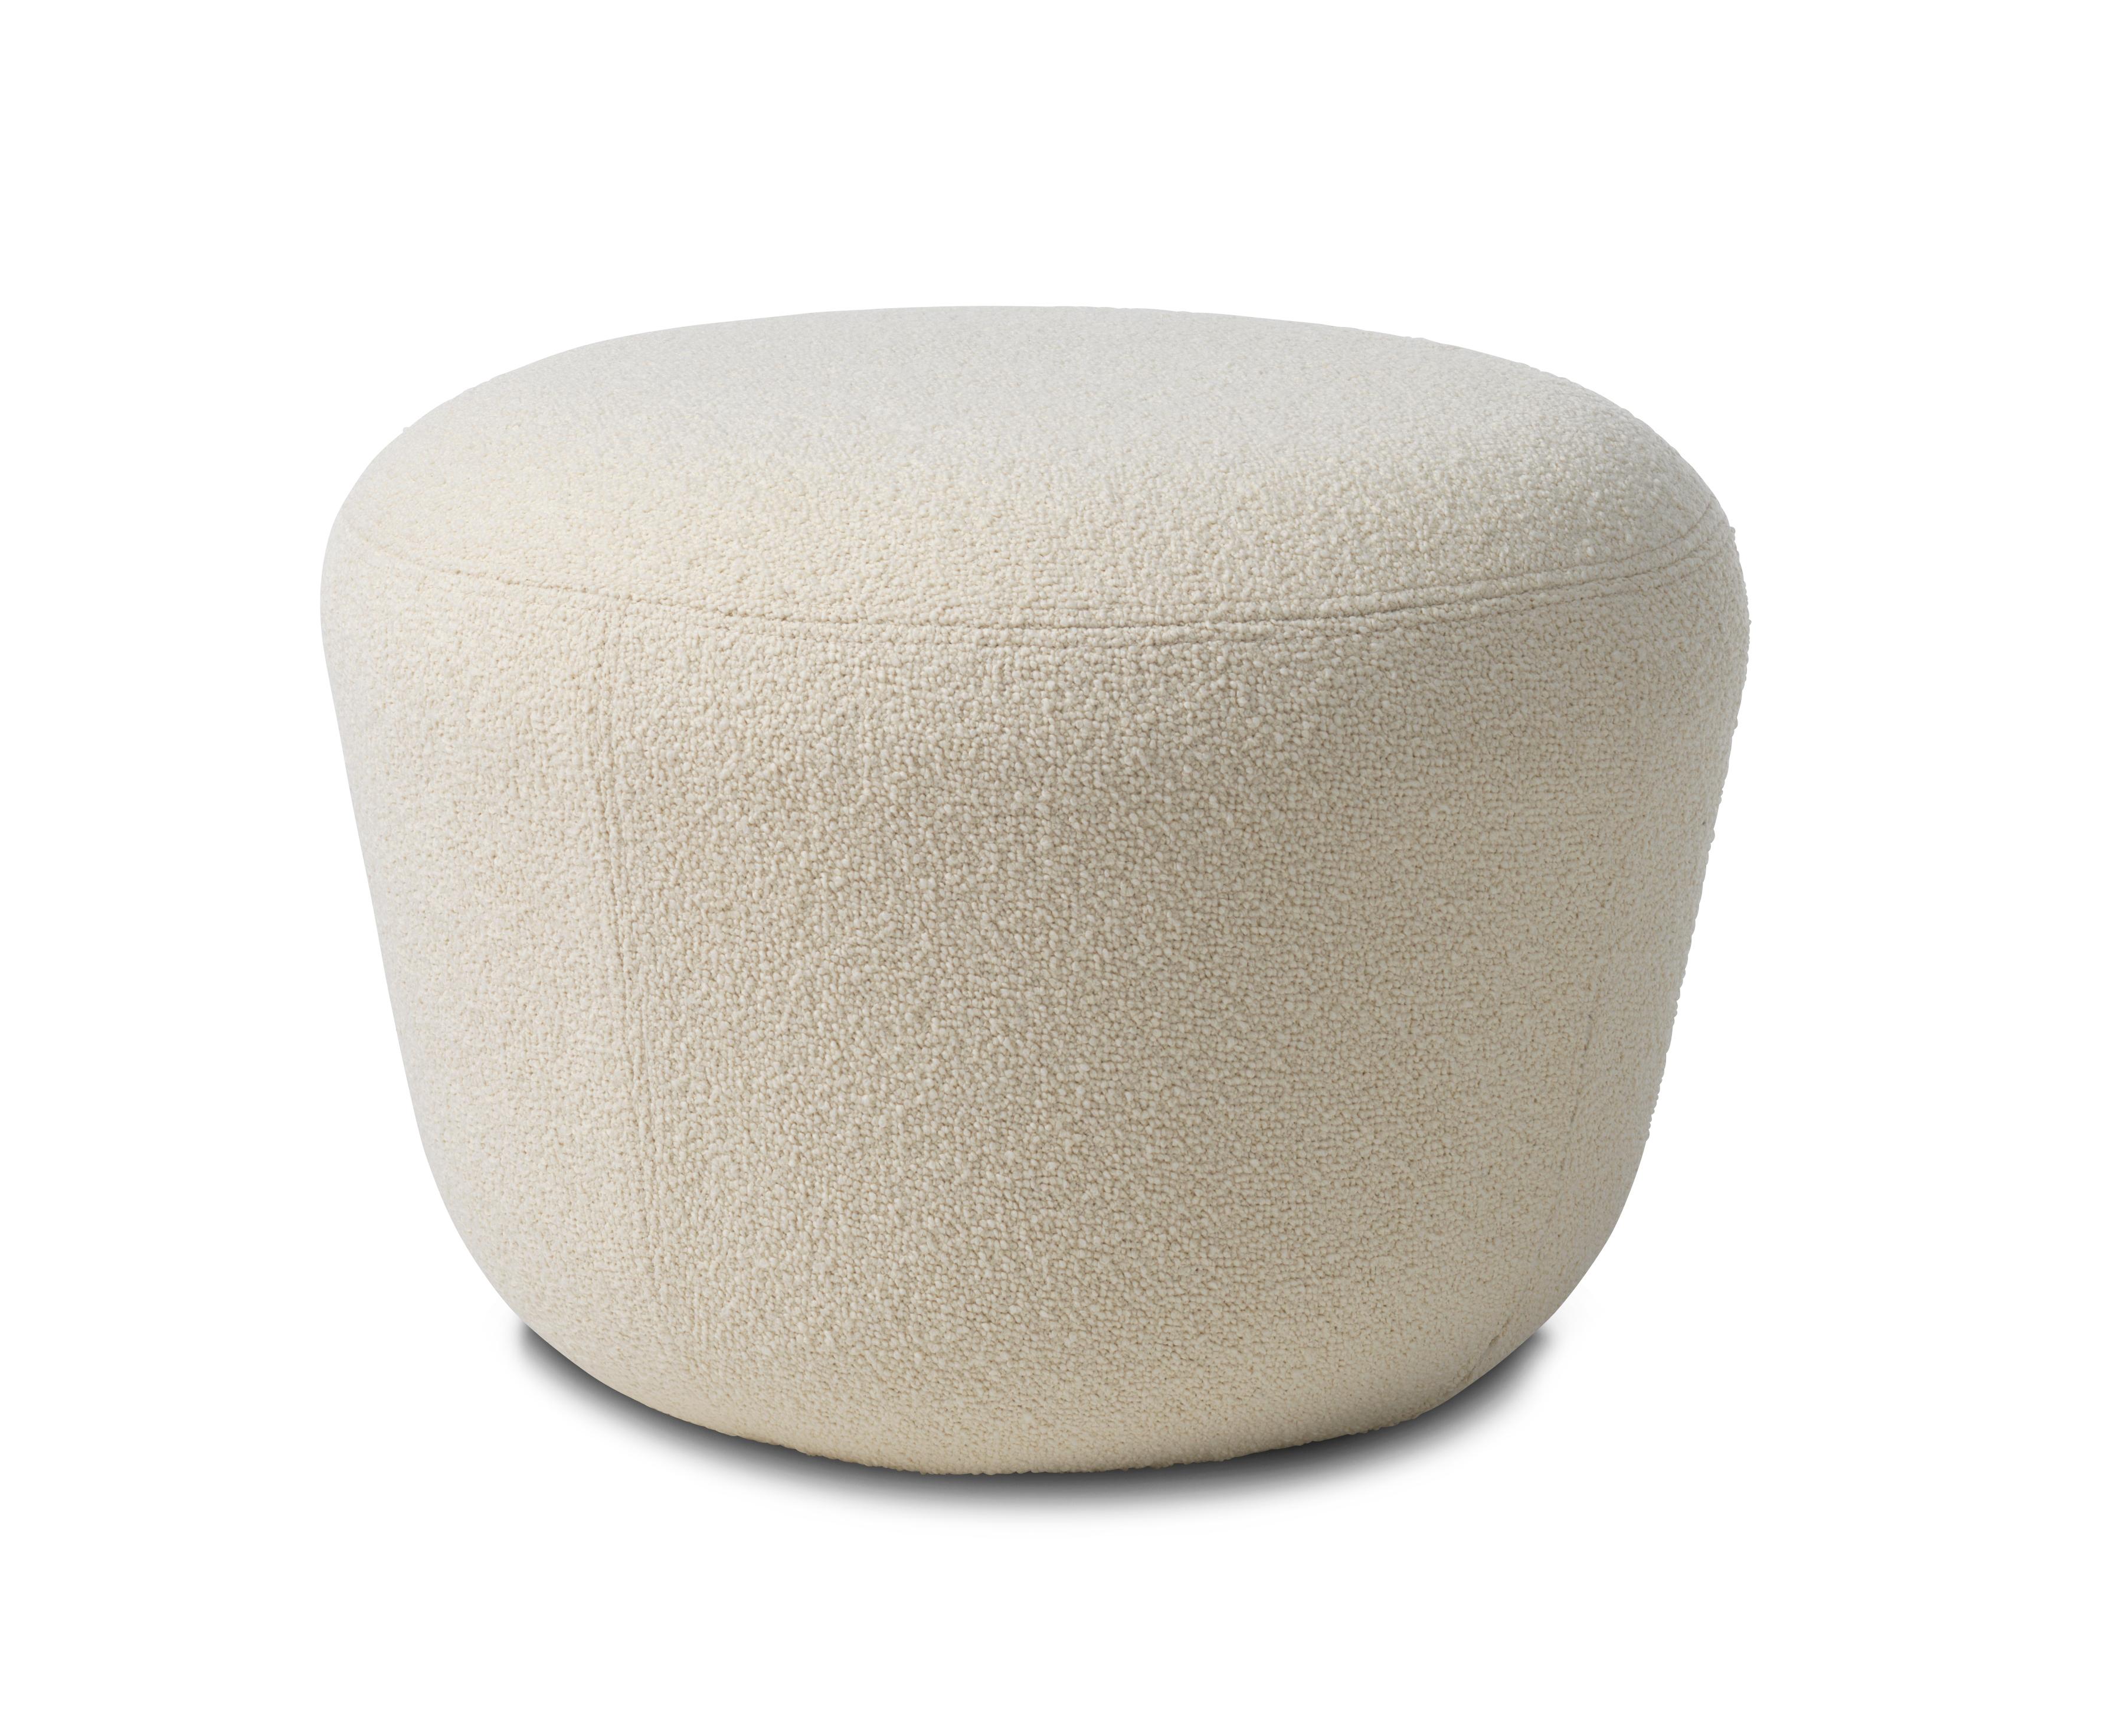 For Sale: White (Barnum 24) Haven Pouf, by Charlotte Høncke from Warm Nordic